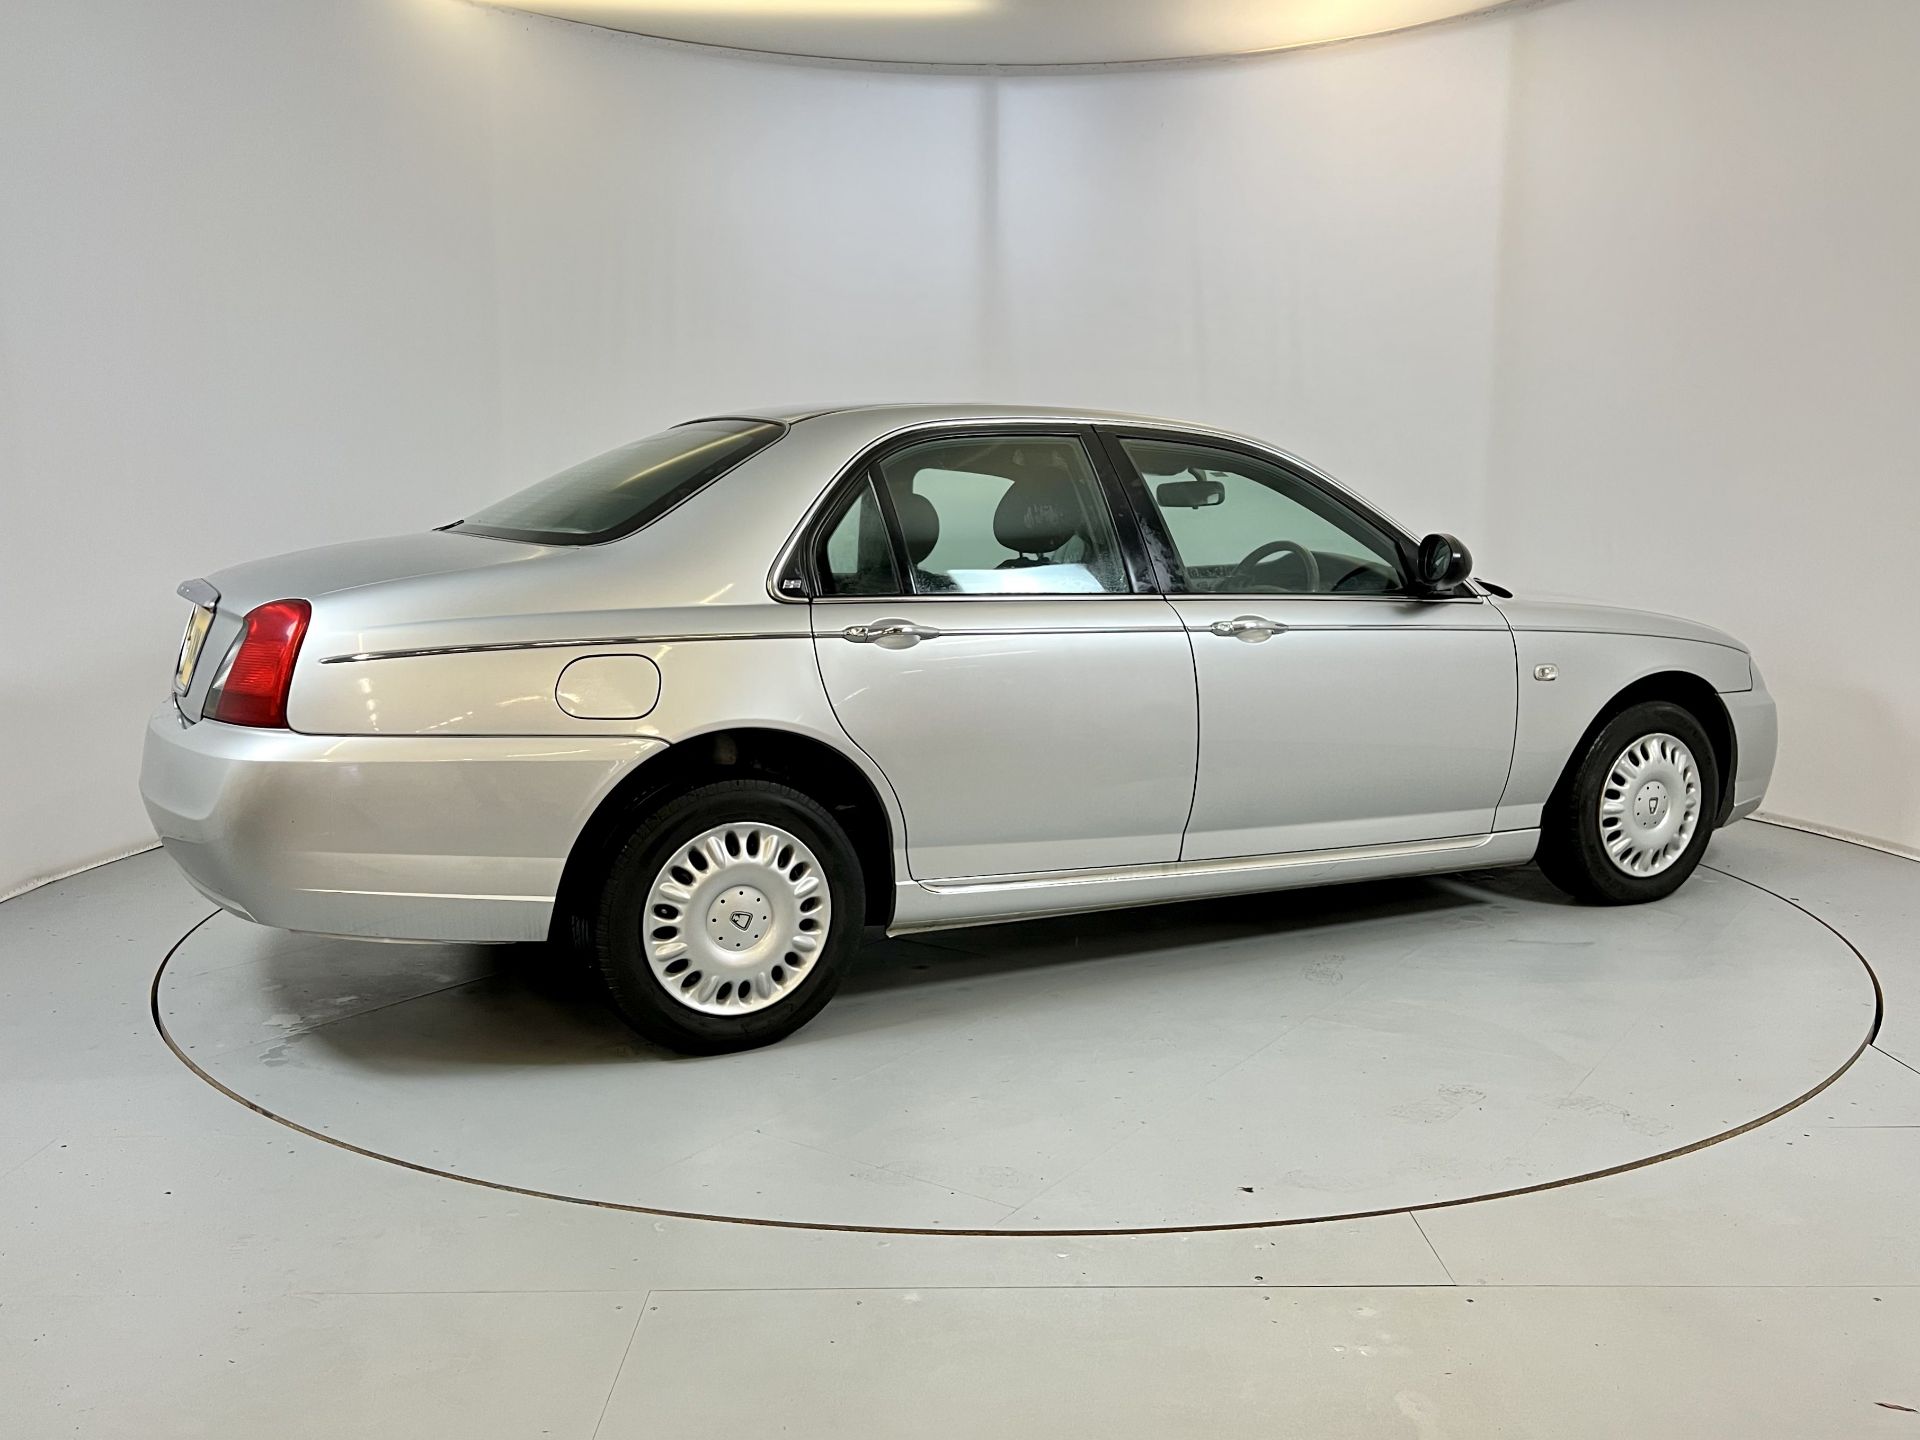 Rover 75 - Image 10 of 33